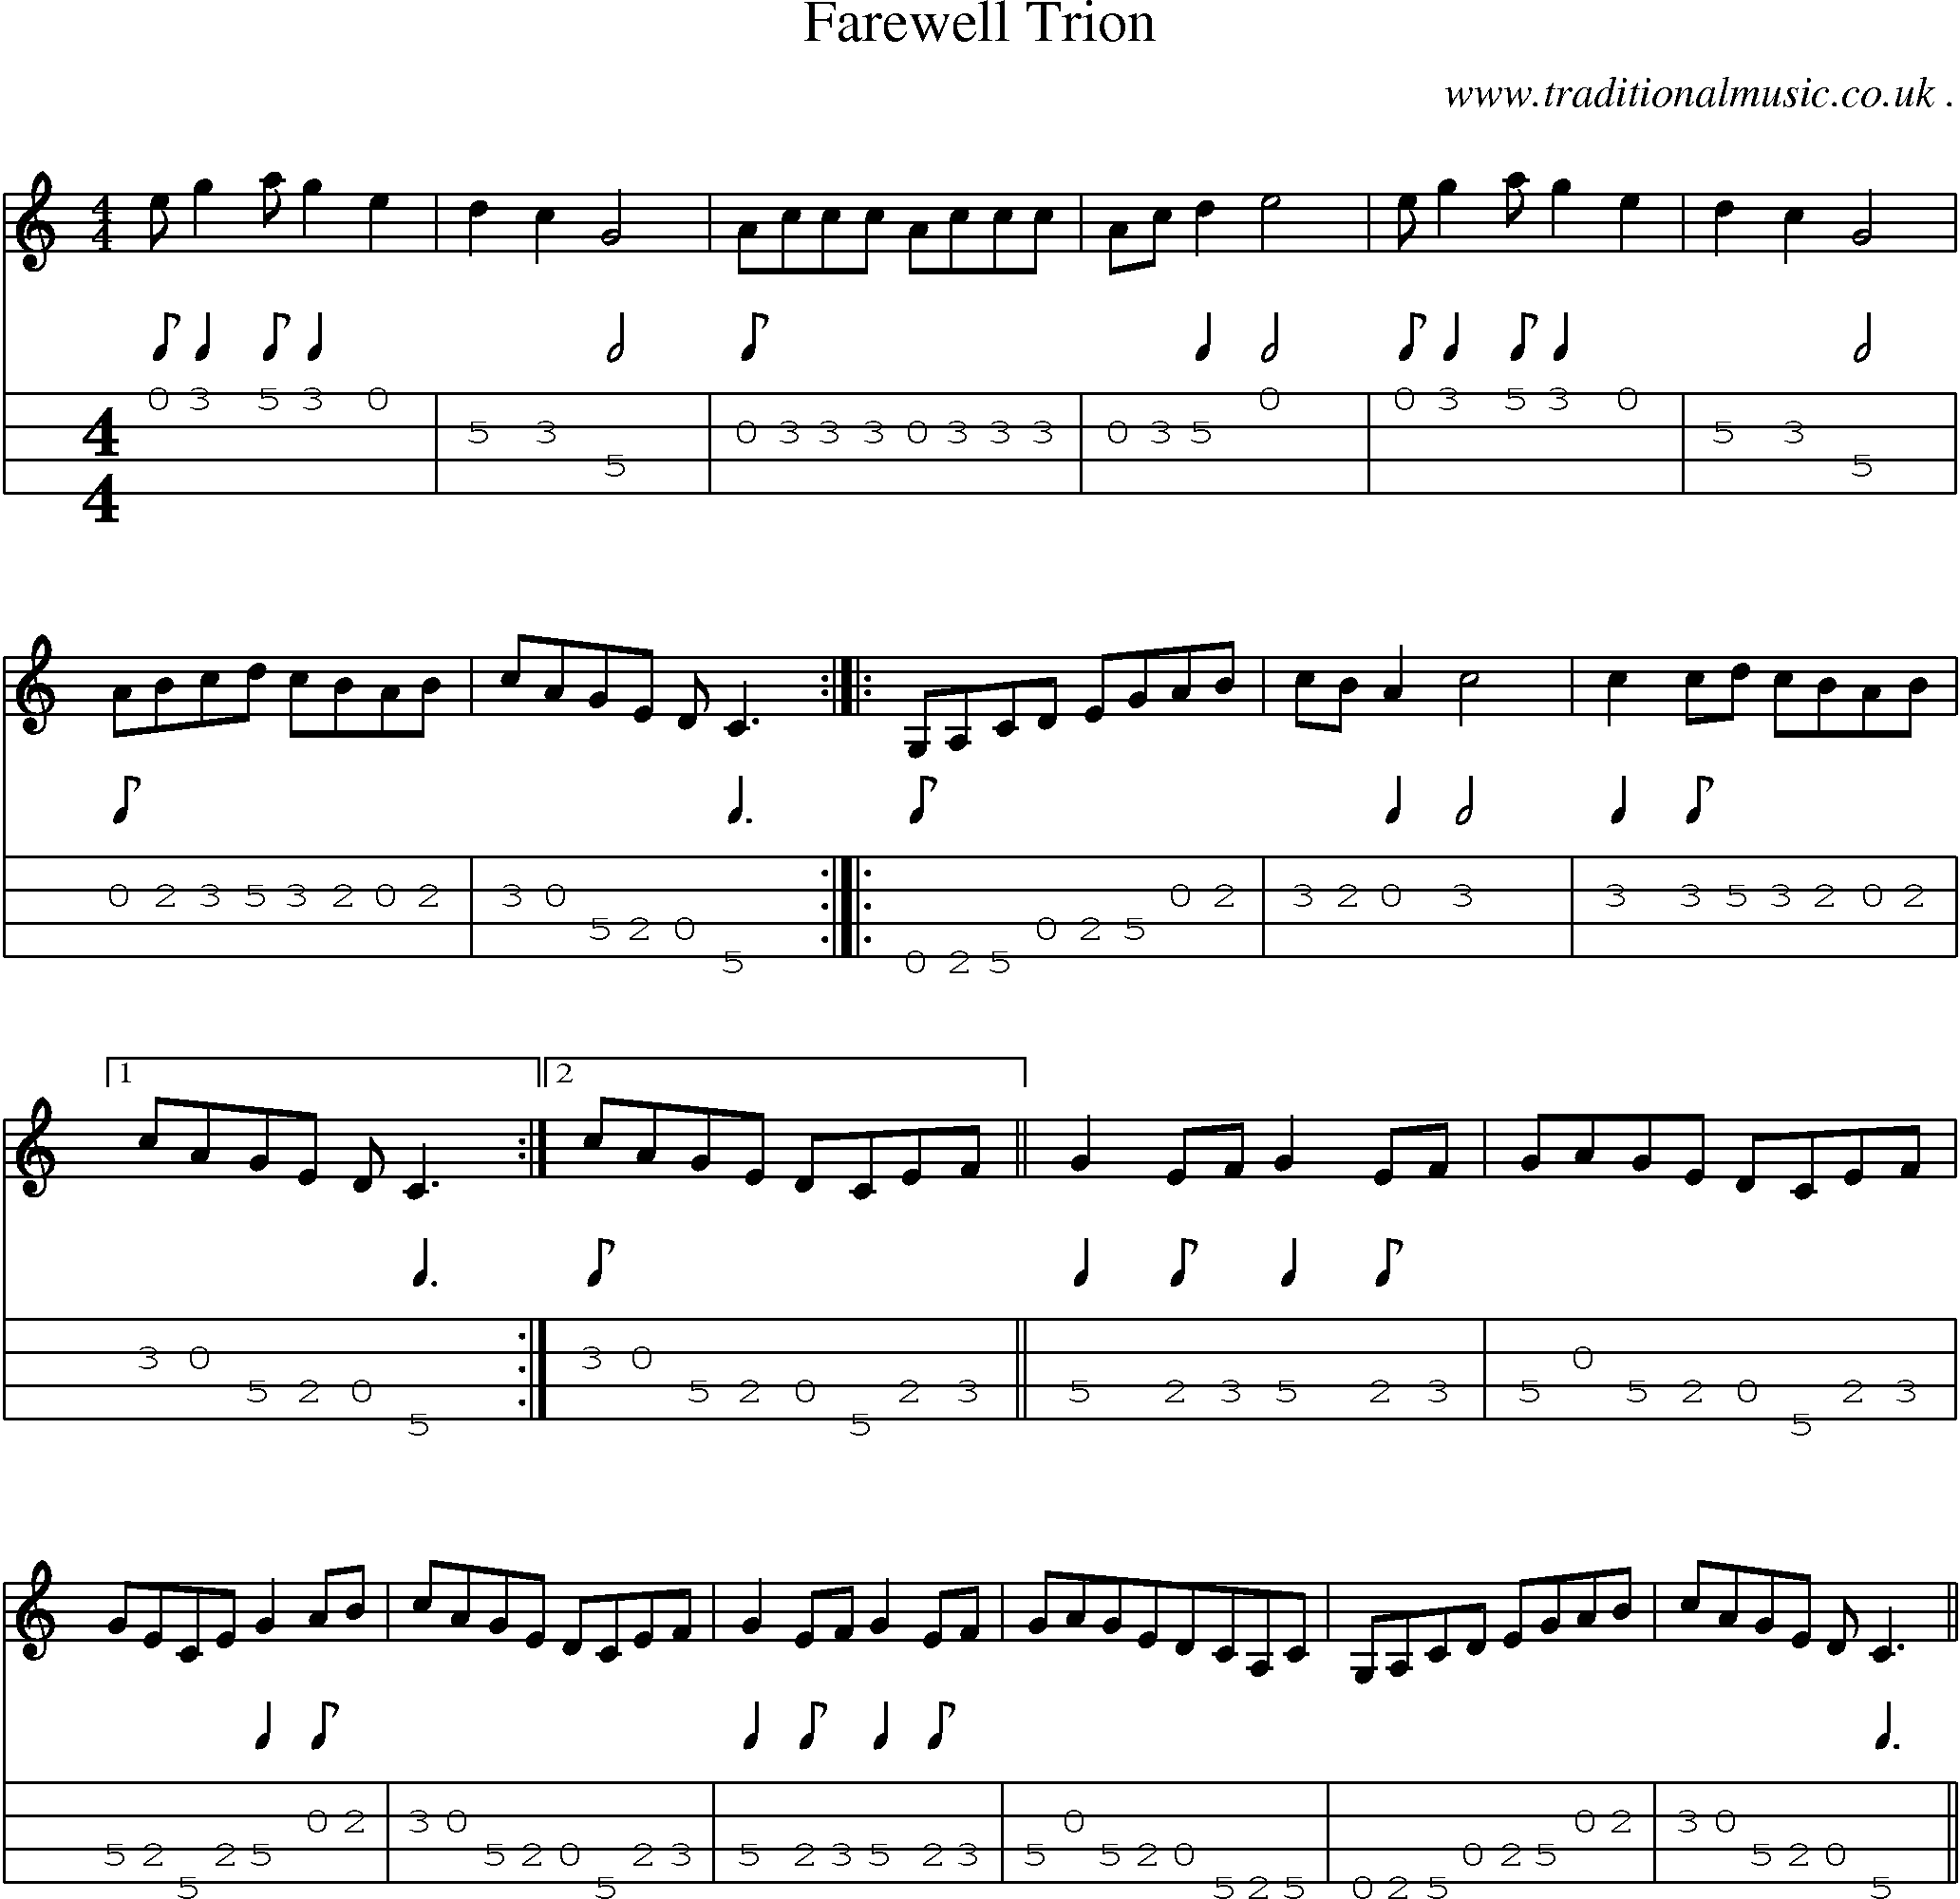 Music Score and Guitar Tabs for Farewell Trion